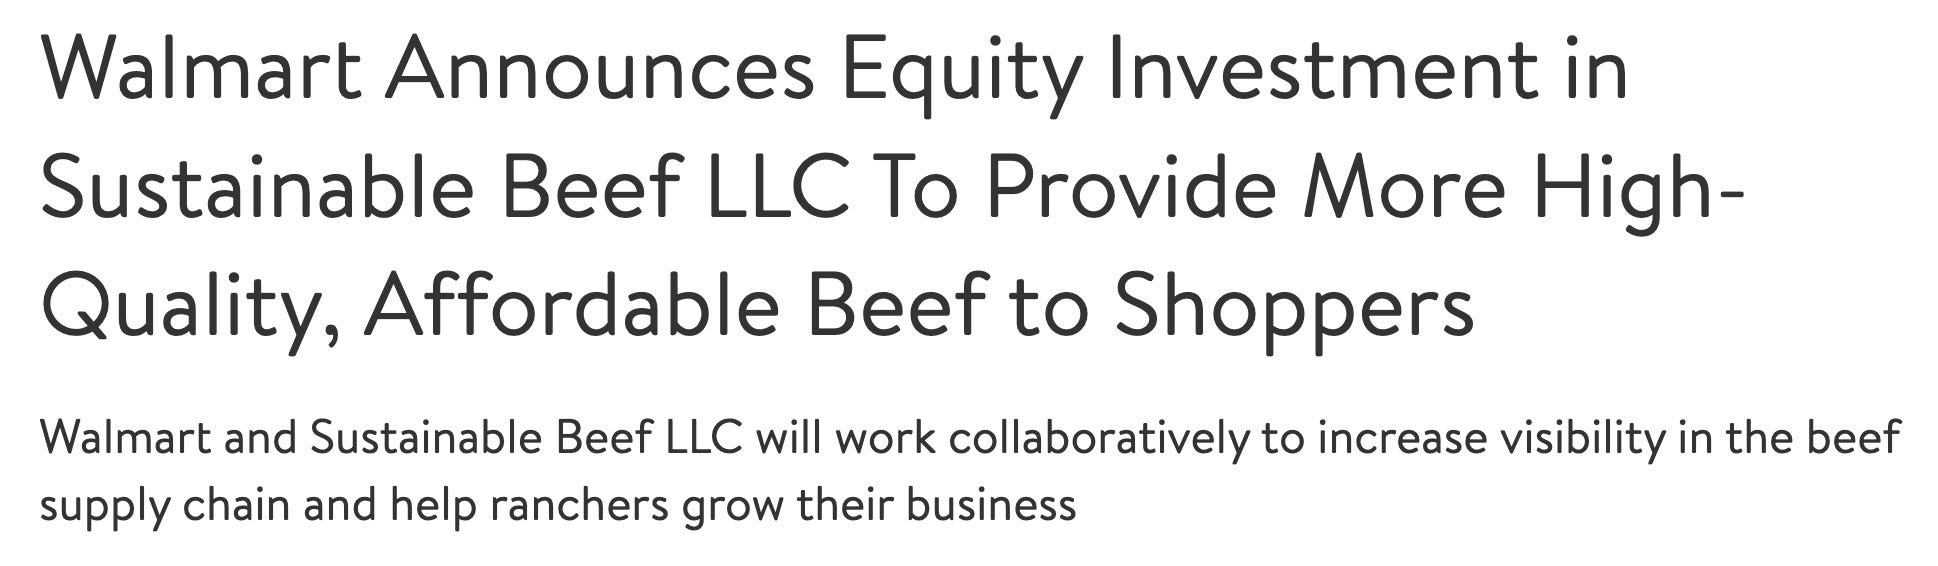 Walmart Announces Equity Investment in Sustainable Beef LLC